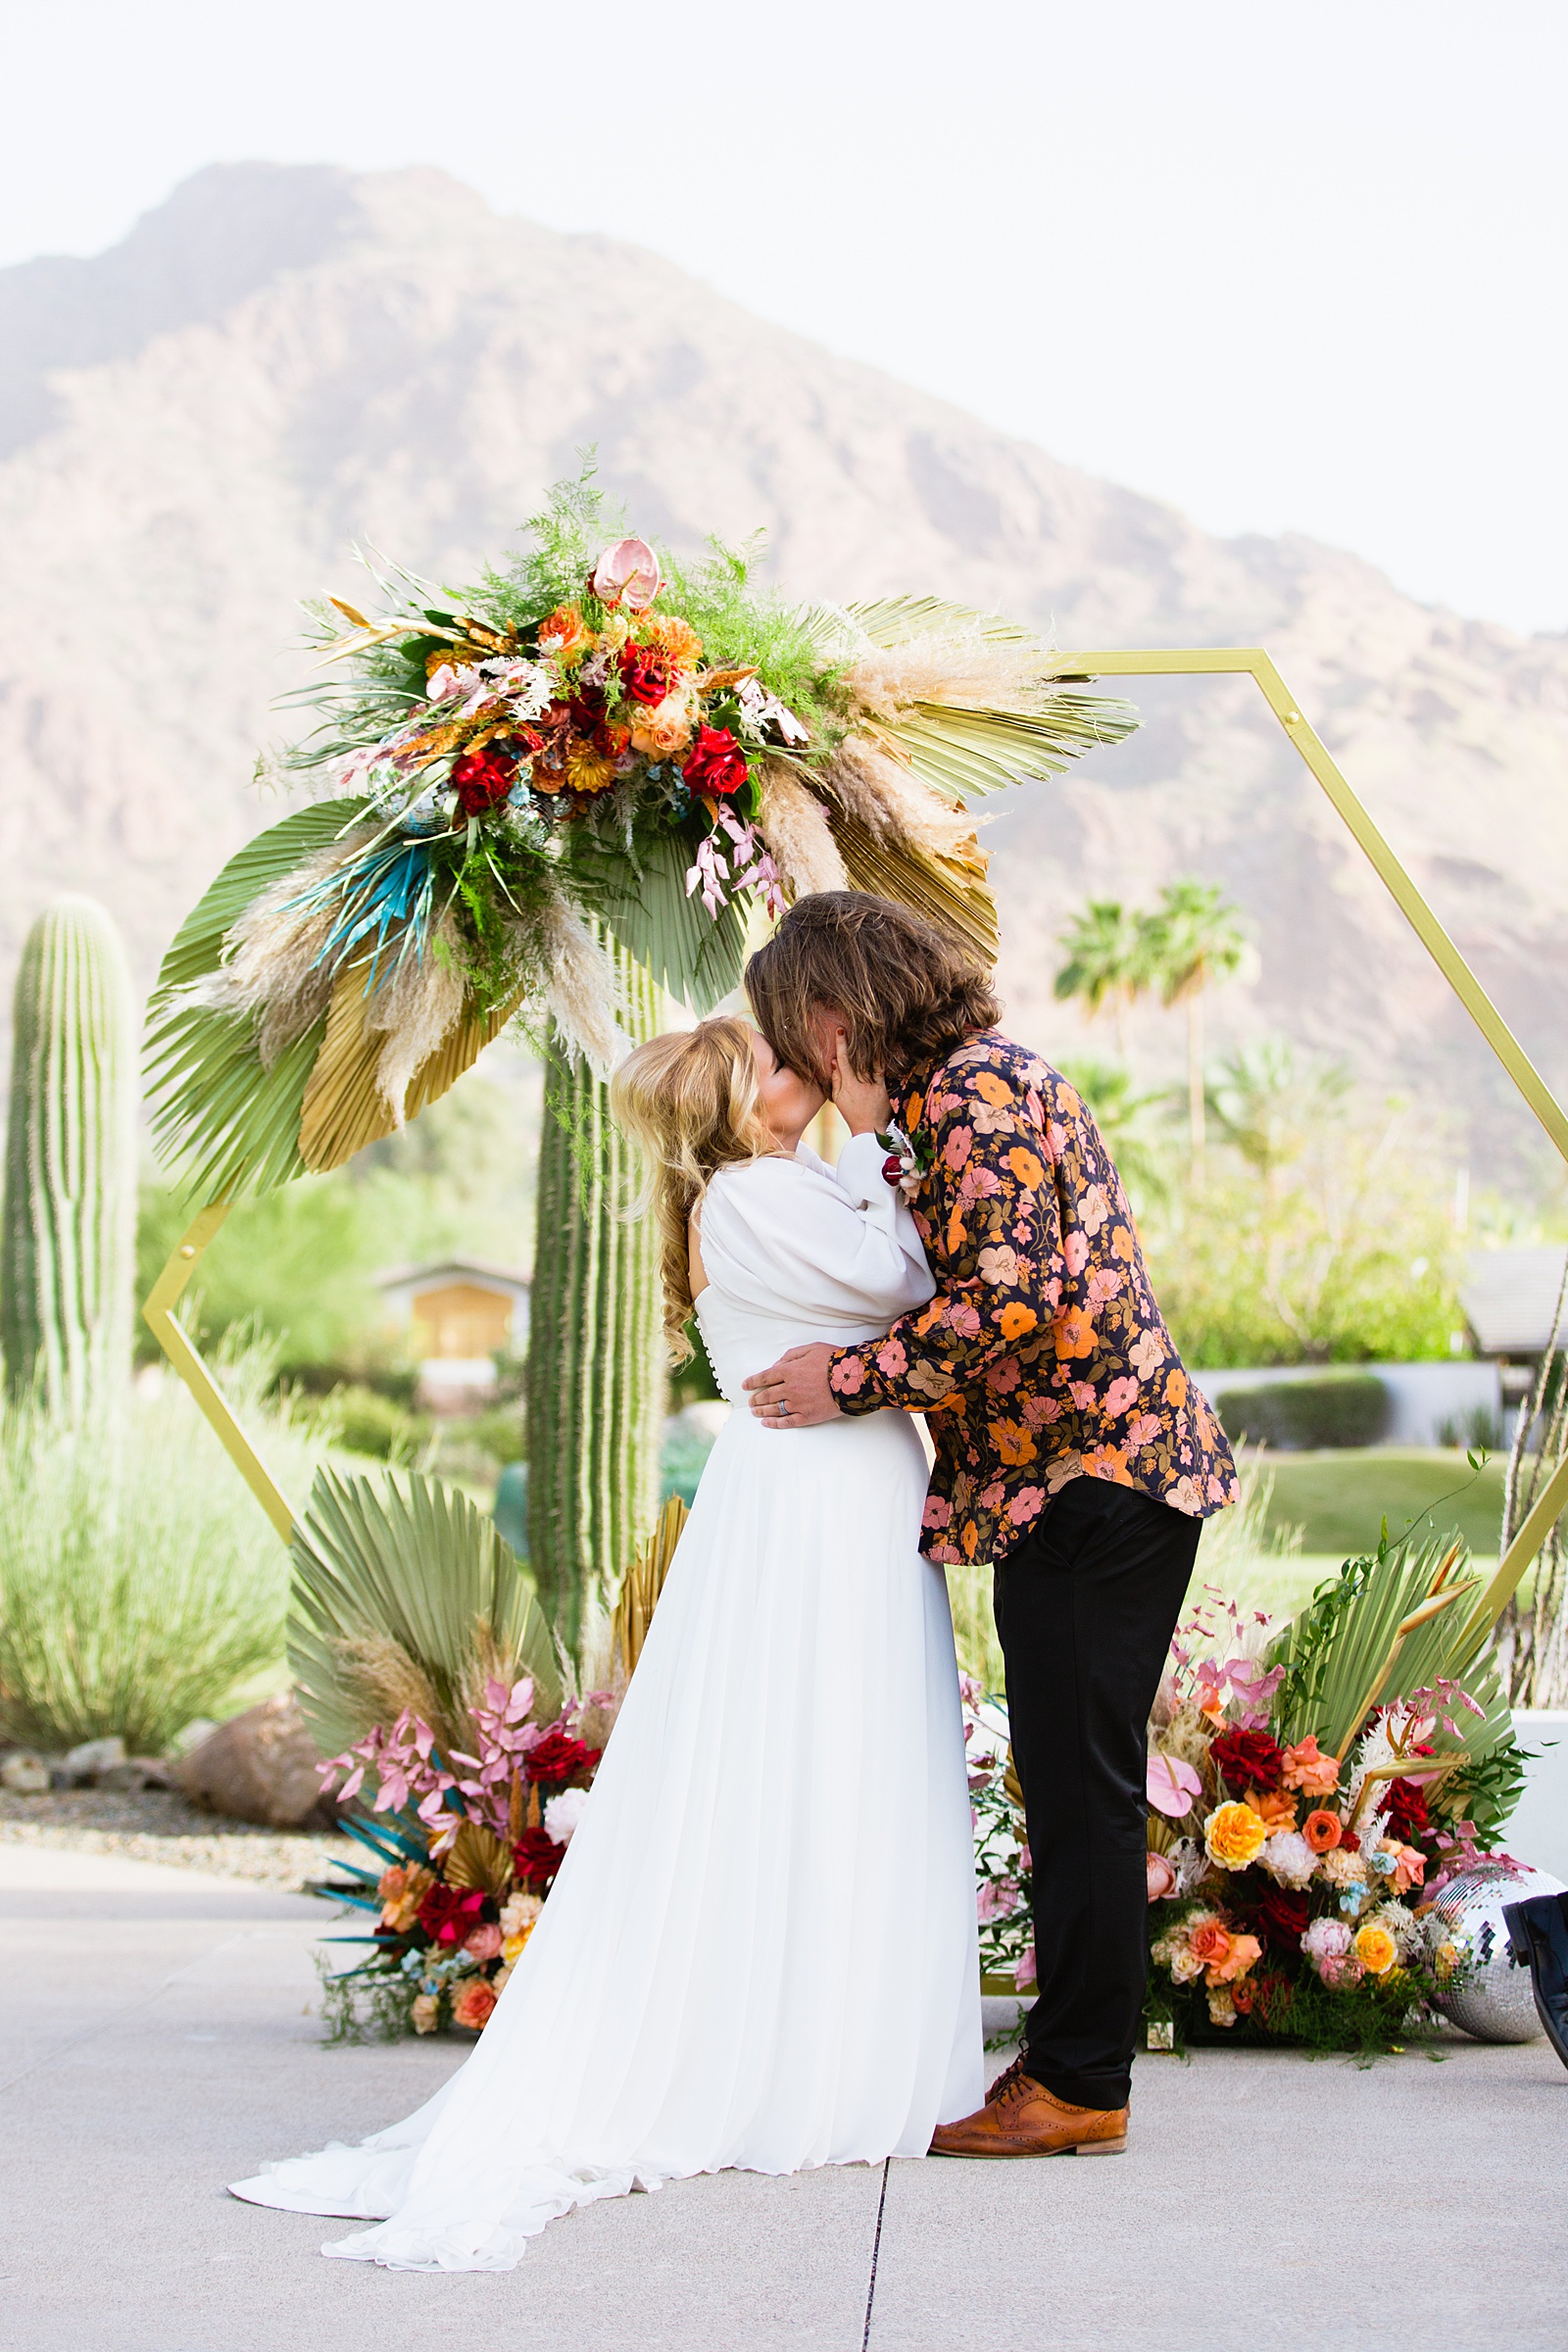 Bride and groom share their first kiss during their wedding ceremony at Mountain Shadows Resort by Arizona wedding photographer PMA Photography.